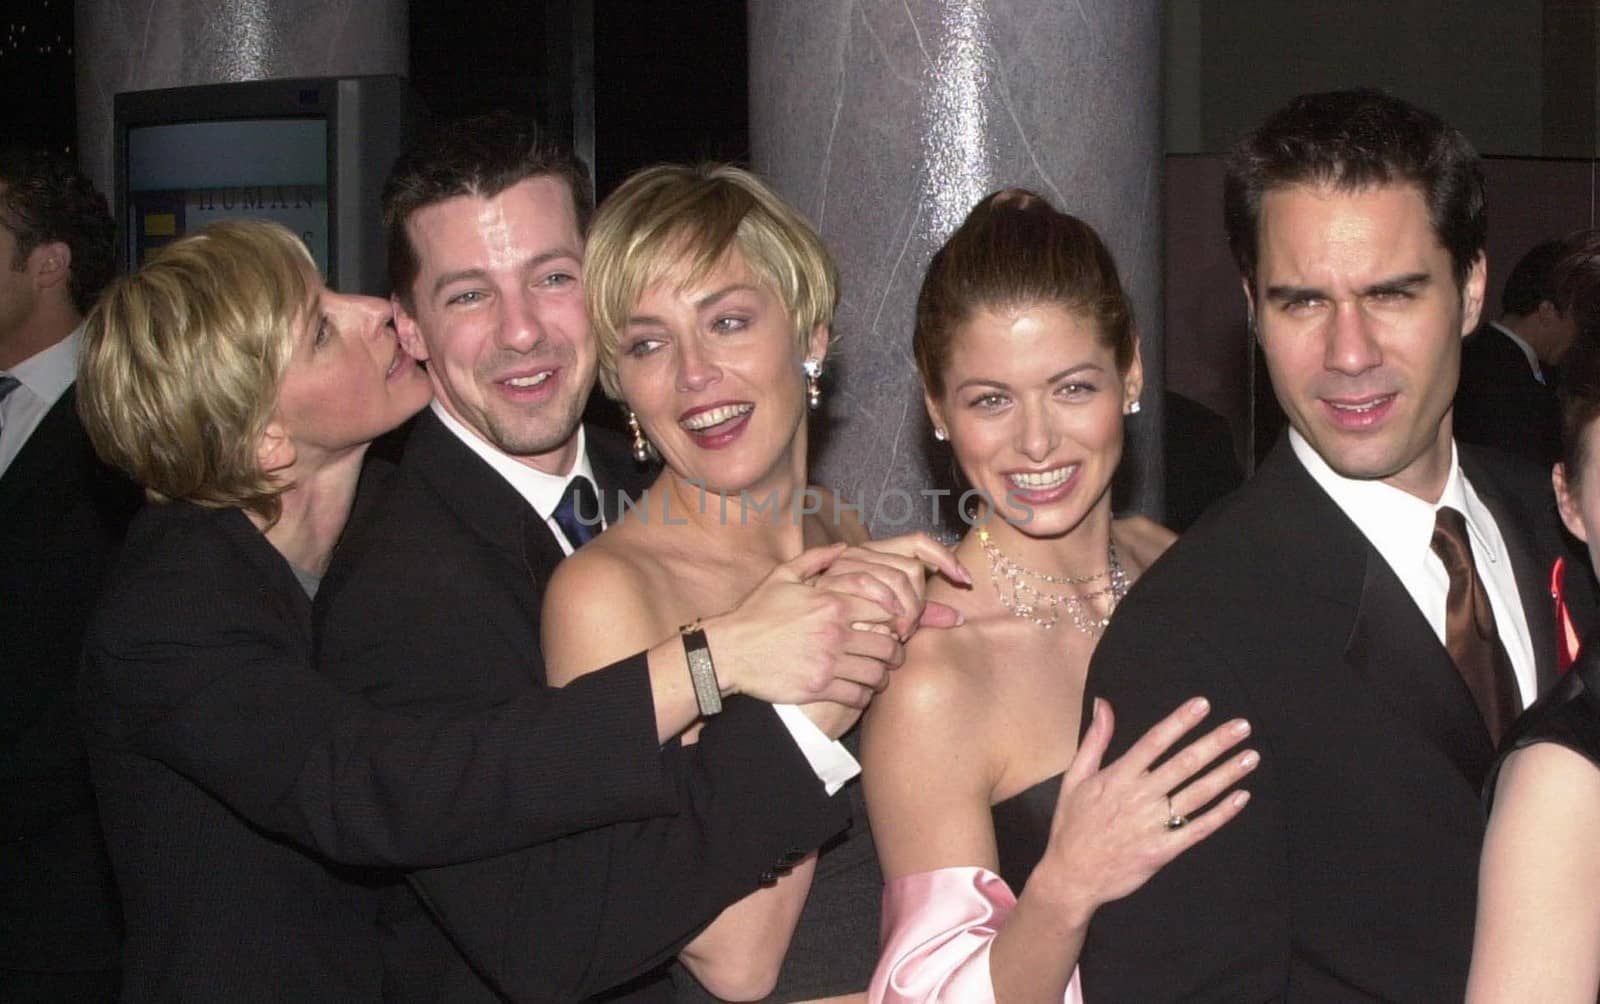 Ellen Degeneres, Sean Hayes, Sharon Stone, Debra Messing and Eric McCormack at the Human Rights Campaign Gala, 02-19-00